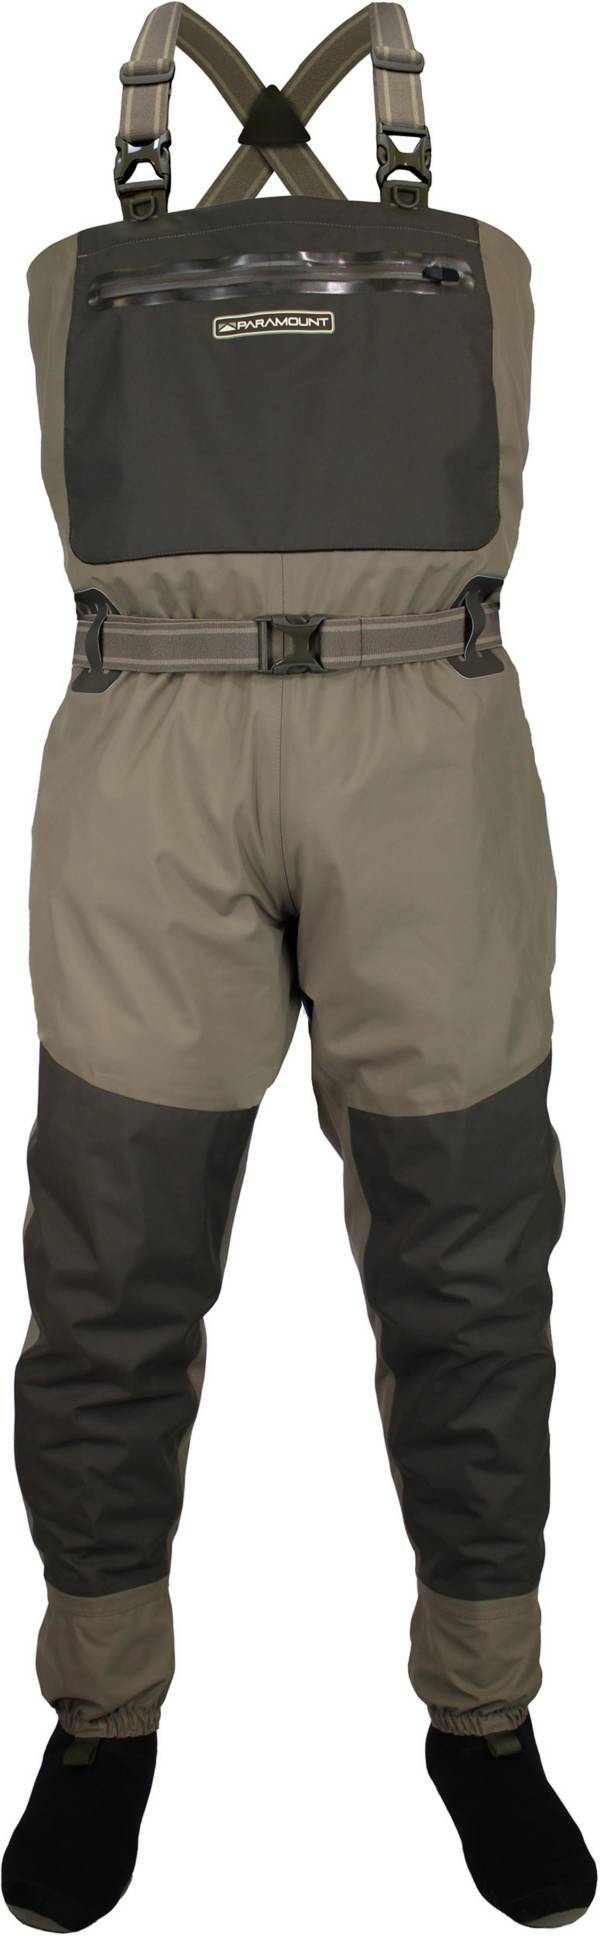 Paramount Deep Eddy Chest Waders, Men's, Large